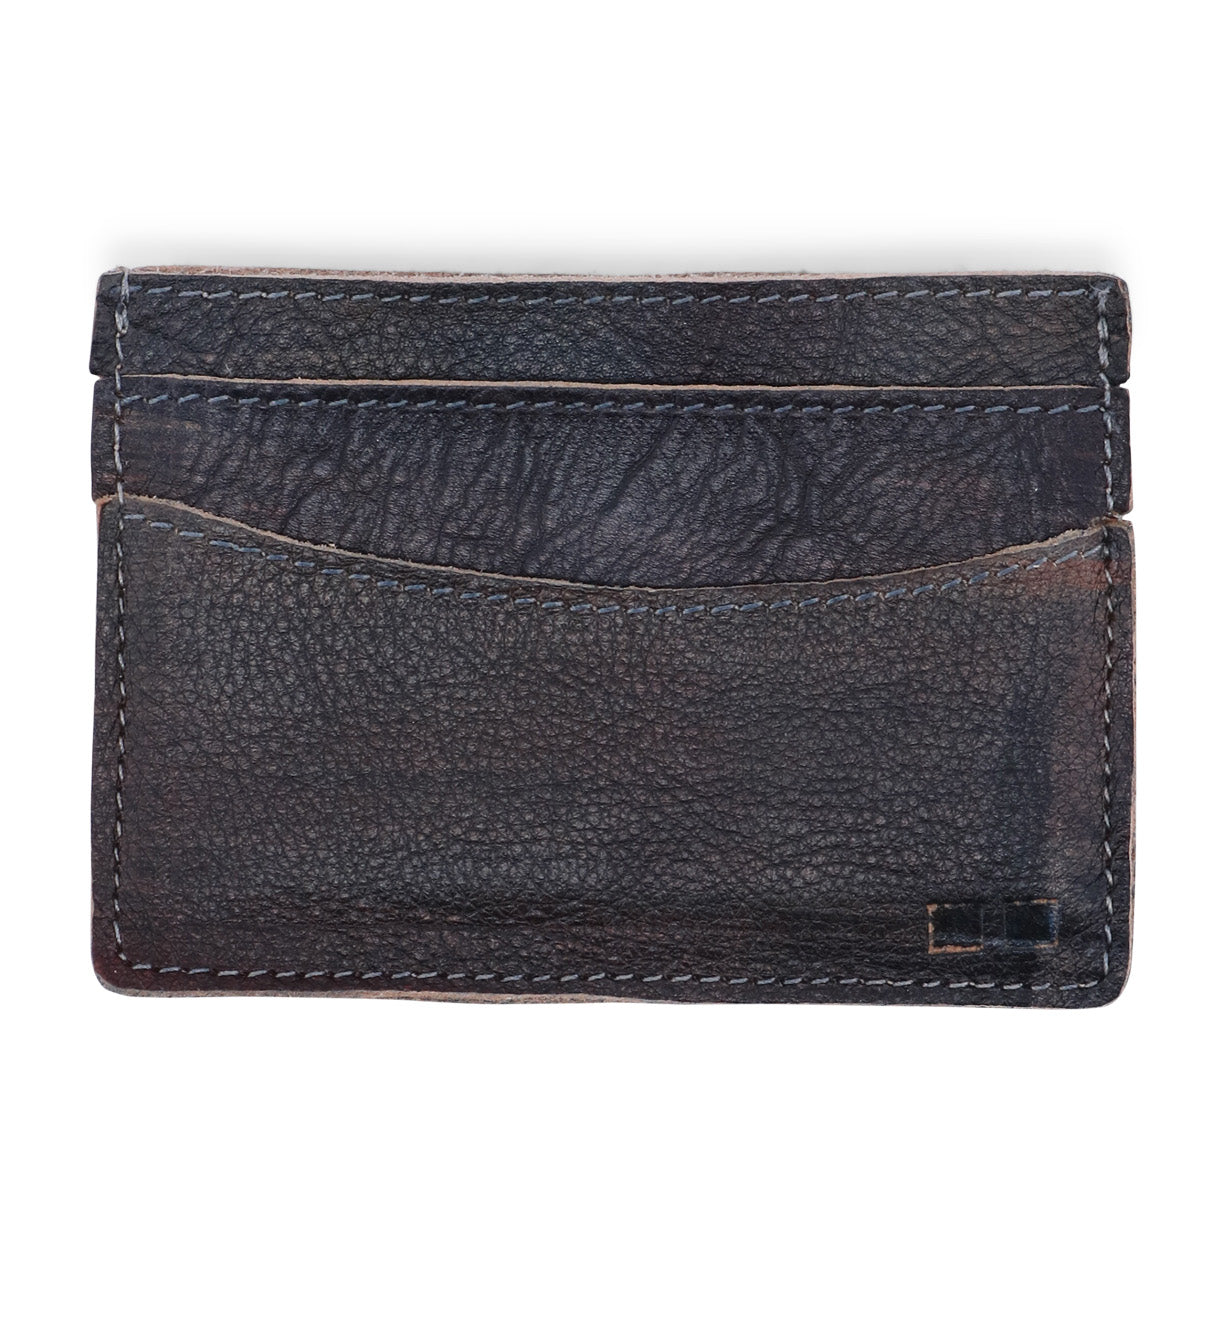 A Chuck card holder by Bed Stu, made of black leather, on a white background.